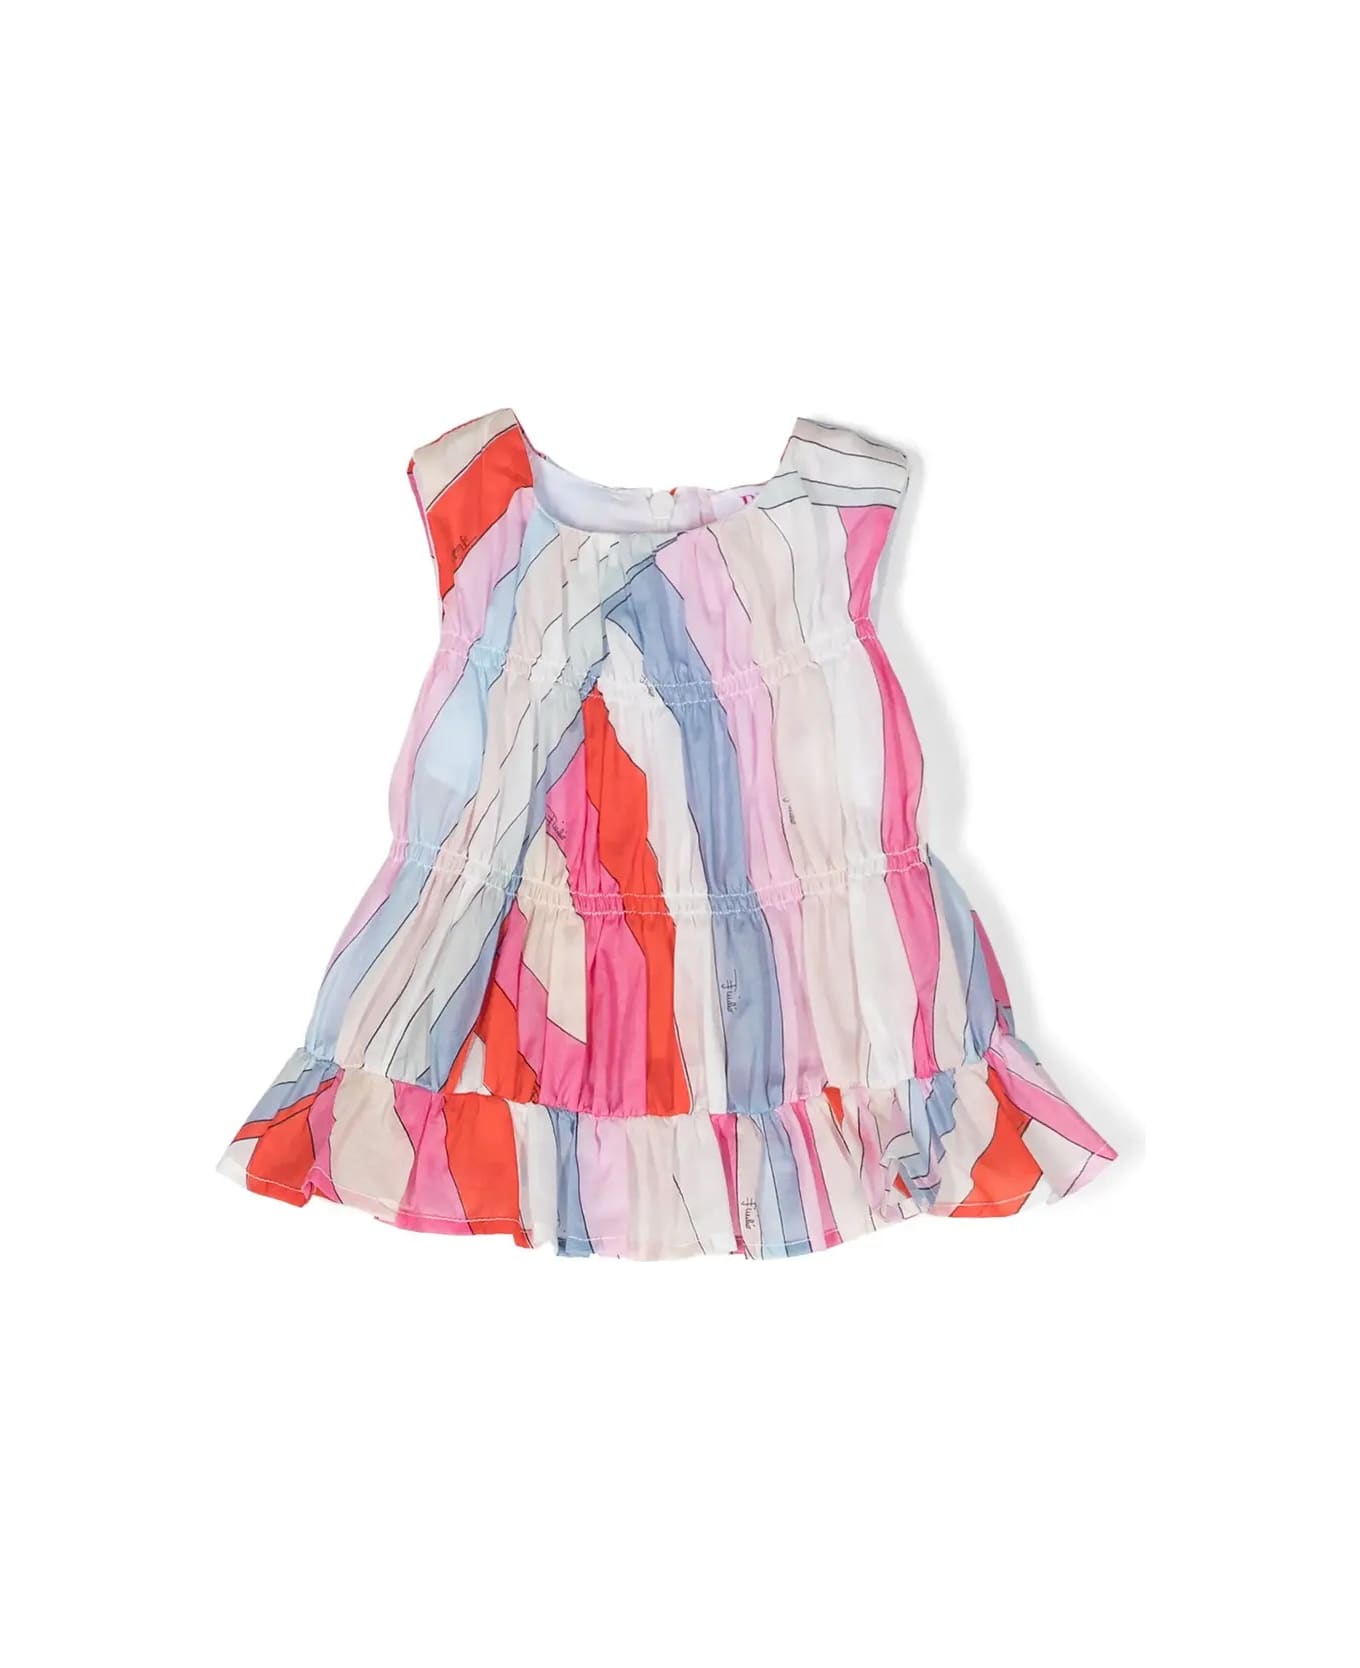 Pucci Sleeveless Top With Light Blue/multicolour Iride Print - Blue トップス